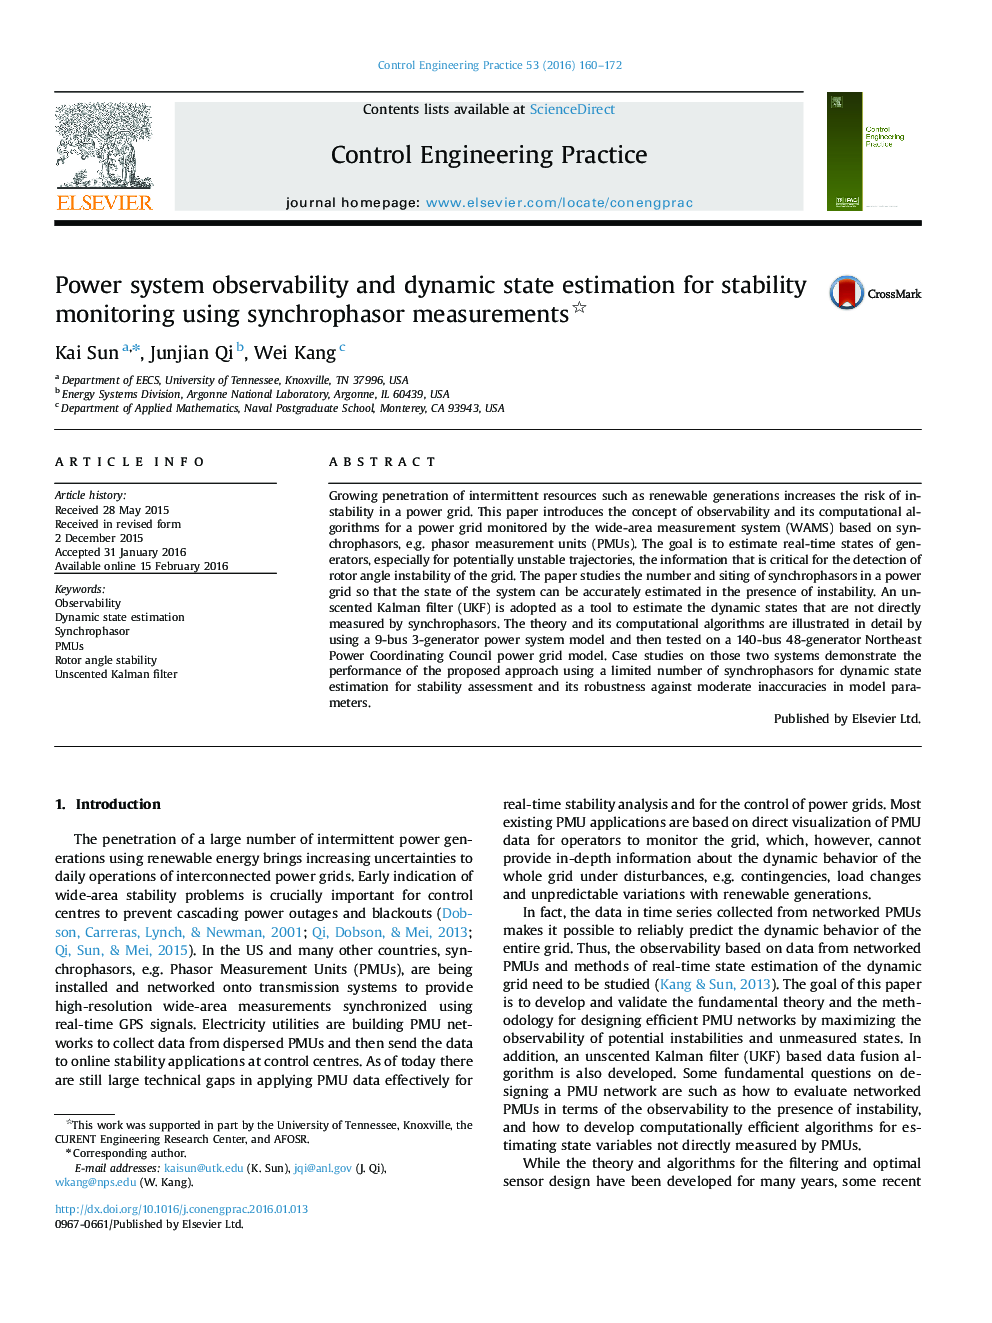 Power system observability and dynamic state estimation for stability monitoring using synchrophasor measurements 